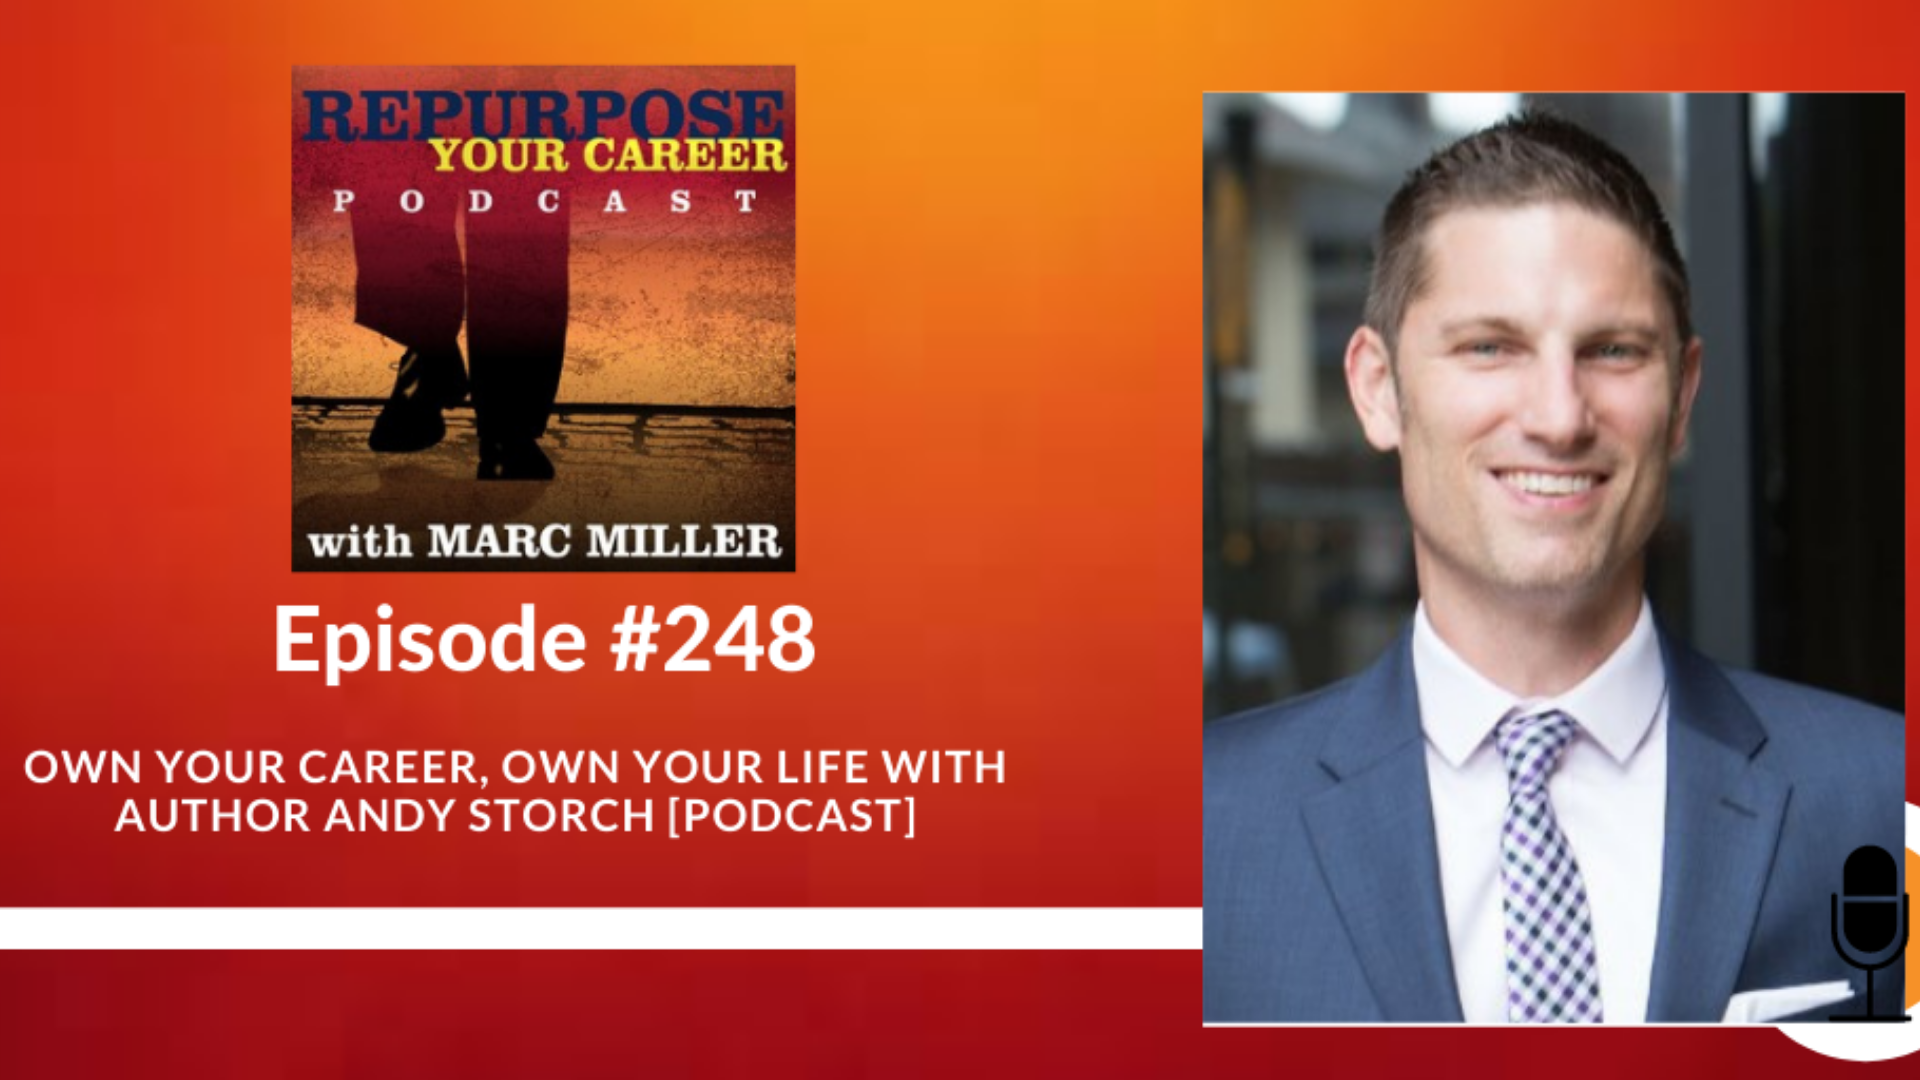 Own your Career, Own Your Life with author Andy Storch [Podcast]